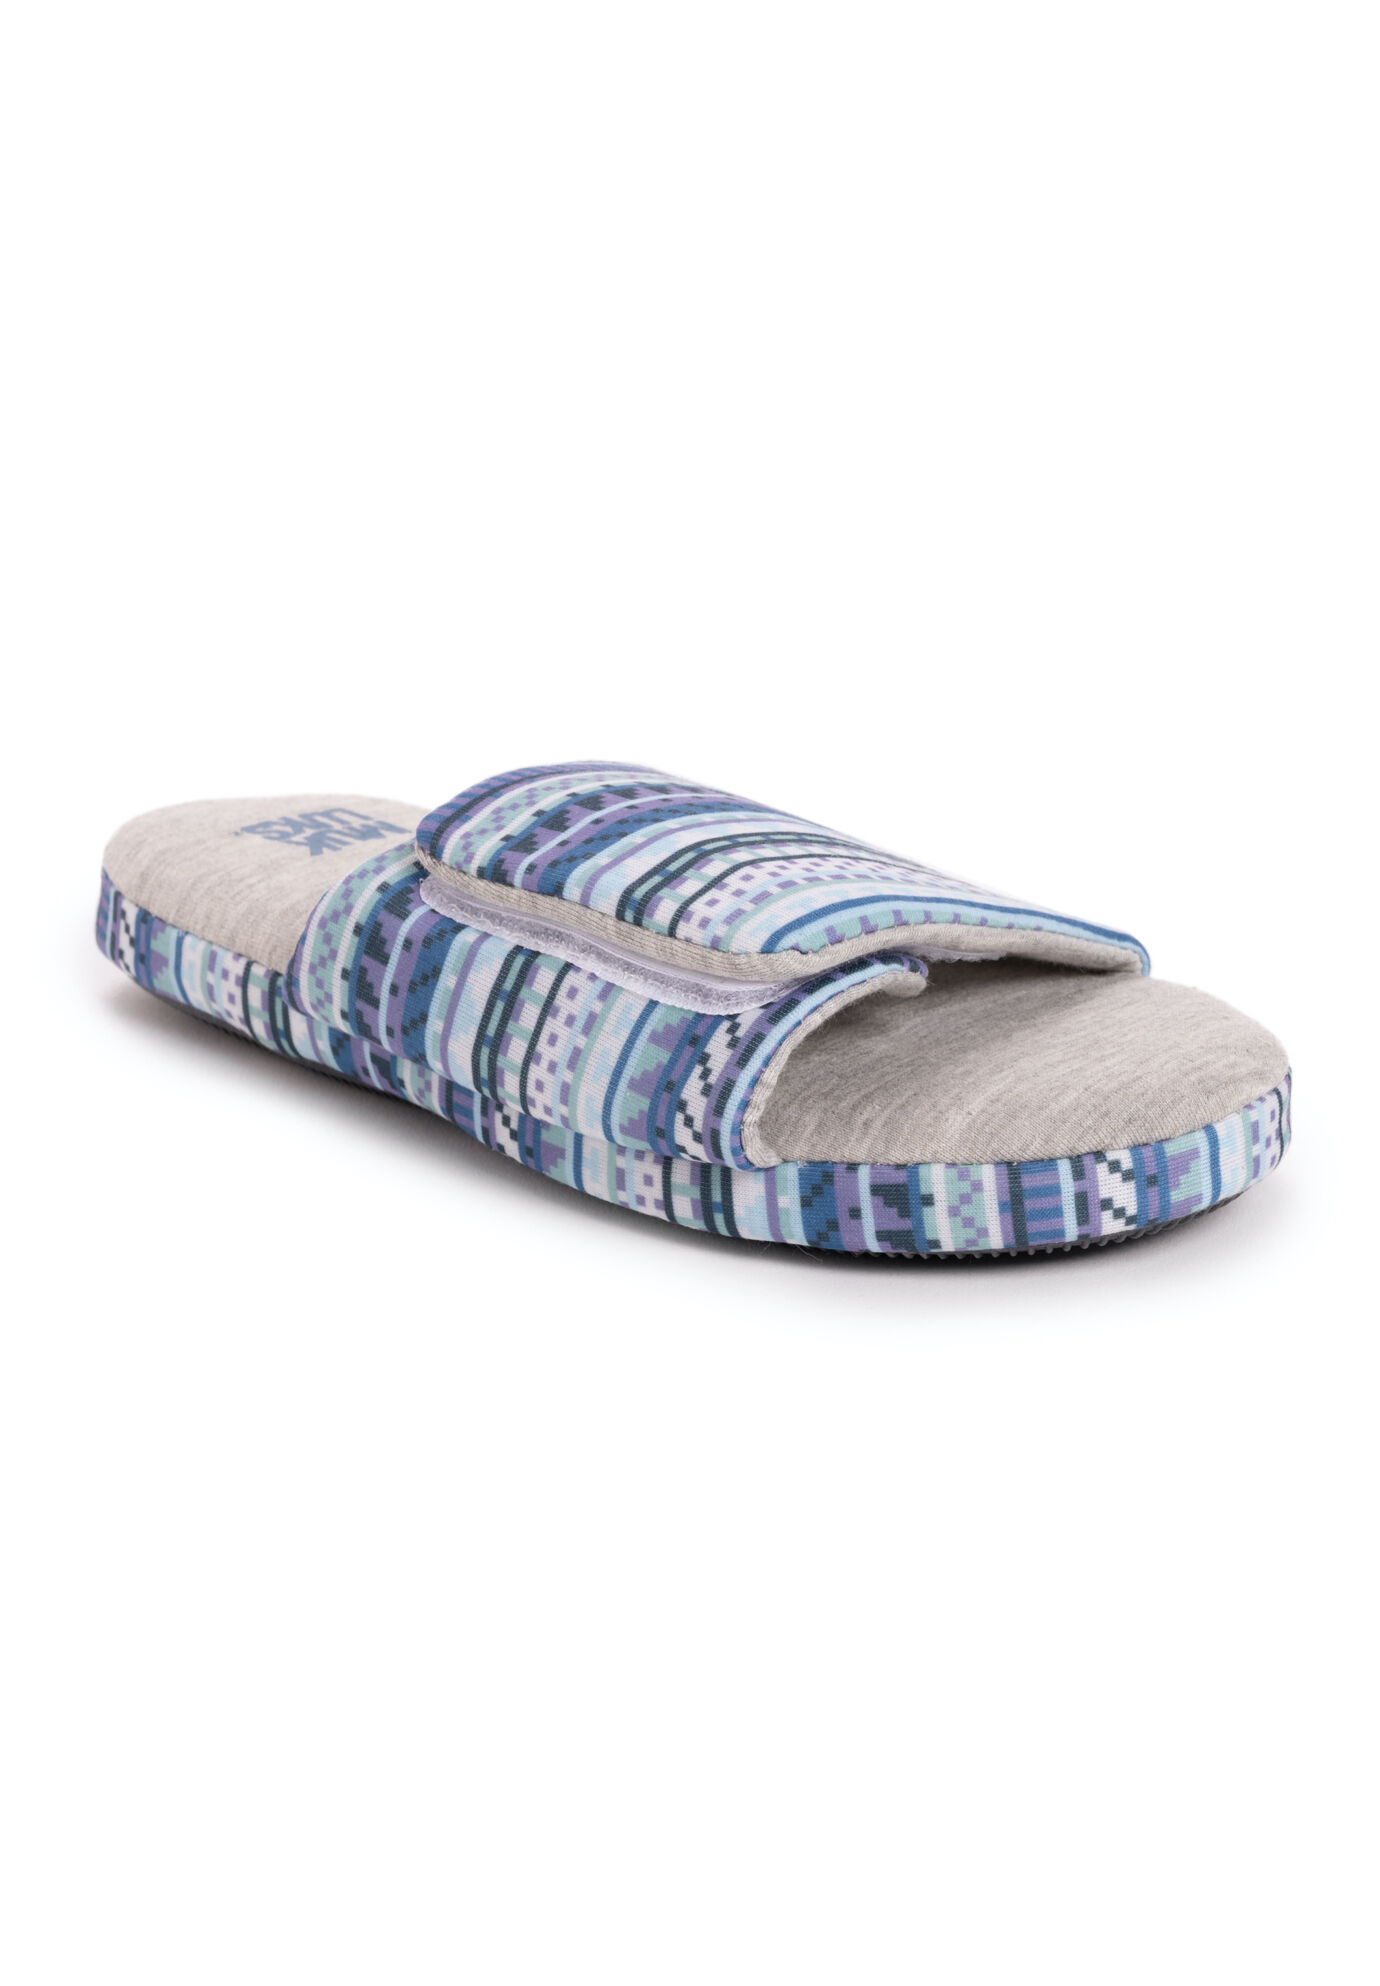 Women's Ansley Jersey Slide Slippers by MUK LUKS in Blue Green (Size LARGE)